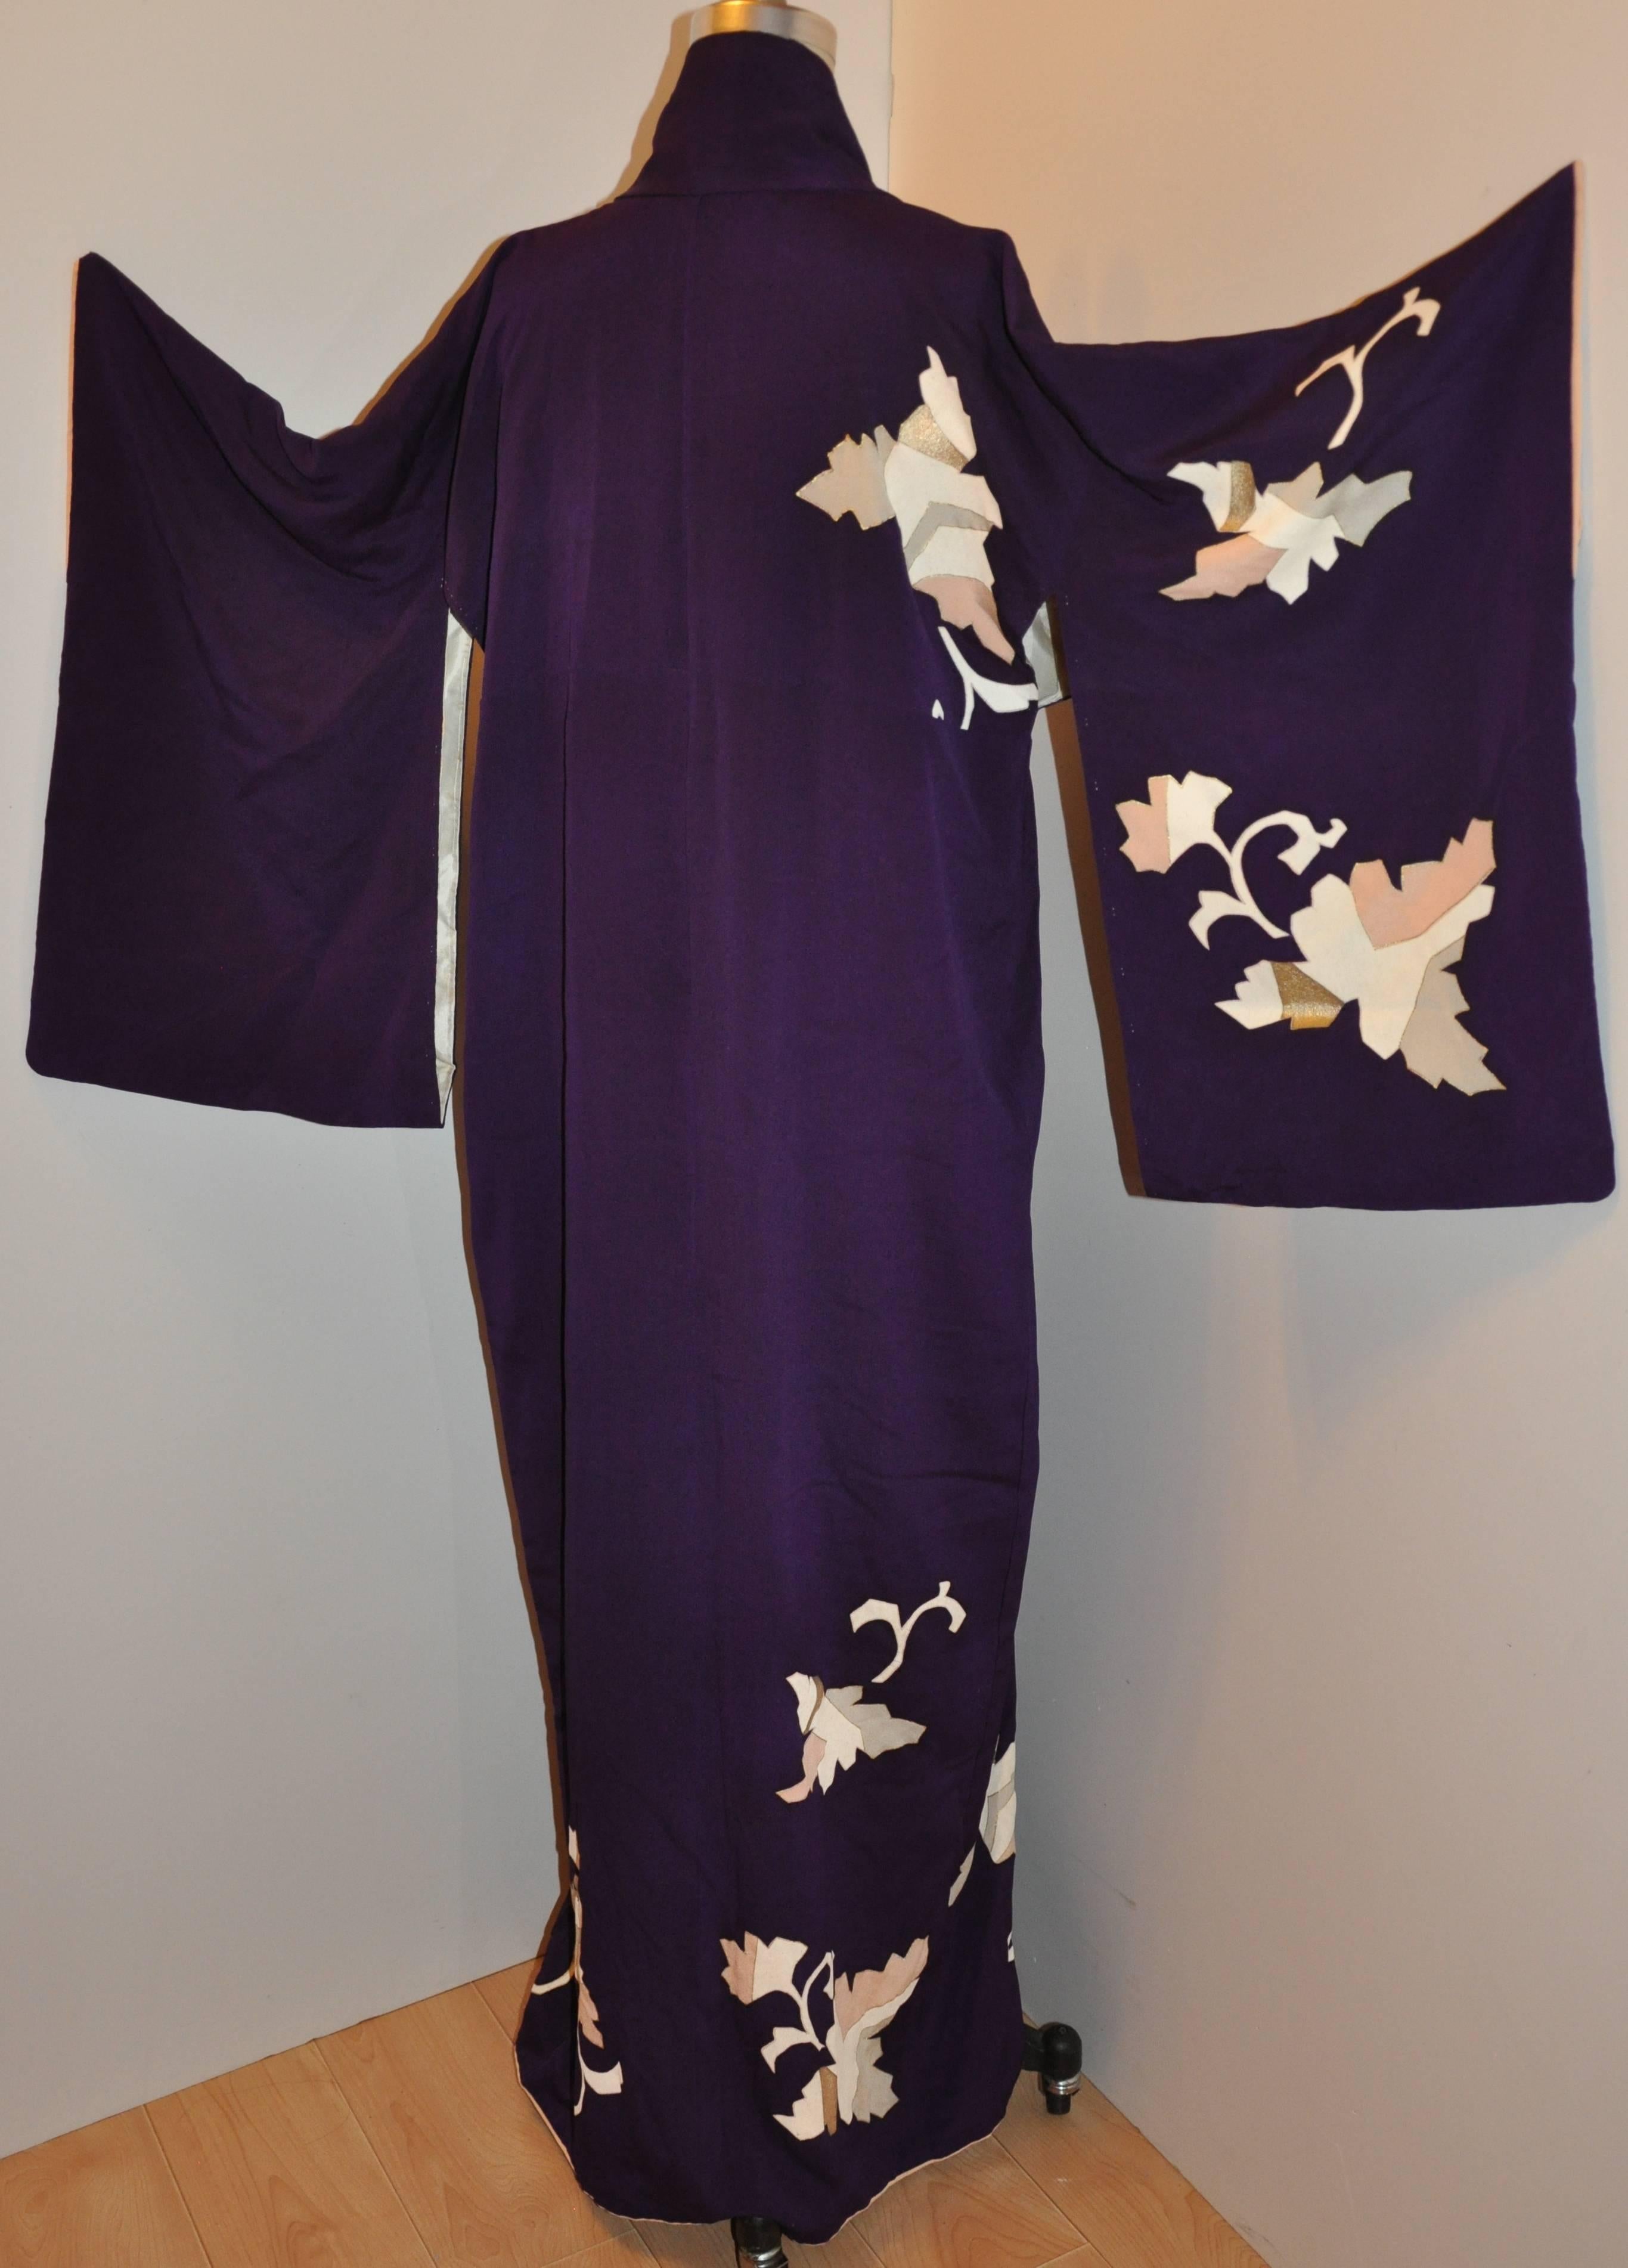        This wonderful traditional and elegant deep plum accented with multi geometric floral silk kimono measures 59 inches in length. The underarm circumference measures 48 inches, collar-to-sleeve's-cuff is 20 1/2 inches, sleeve's length is 22